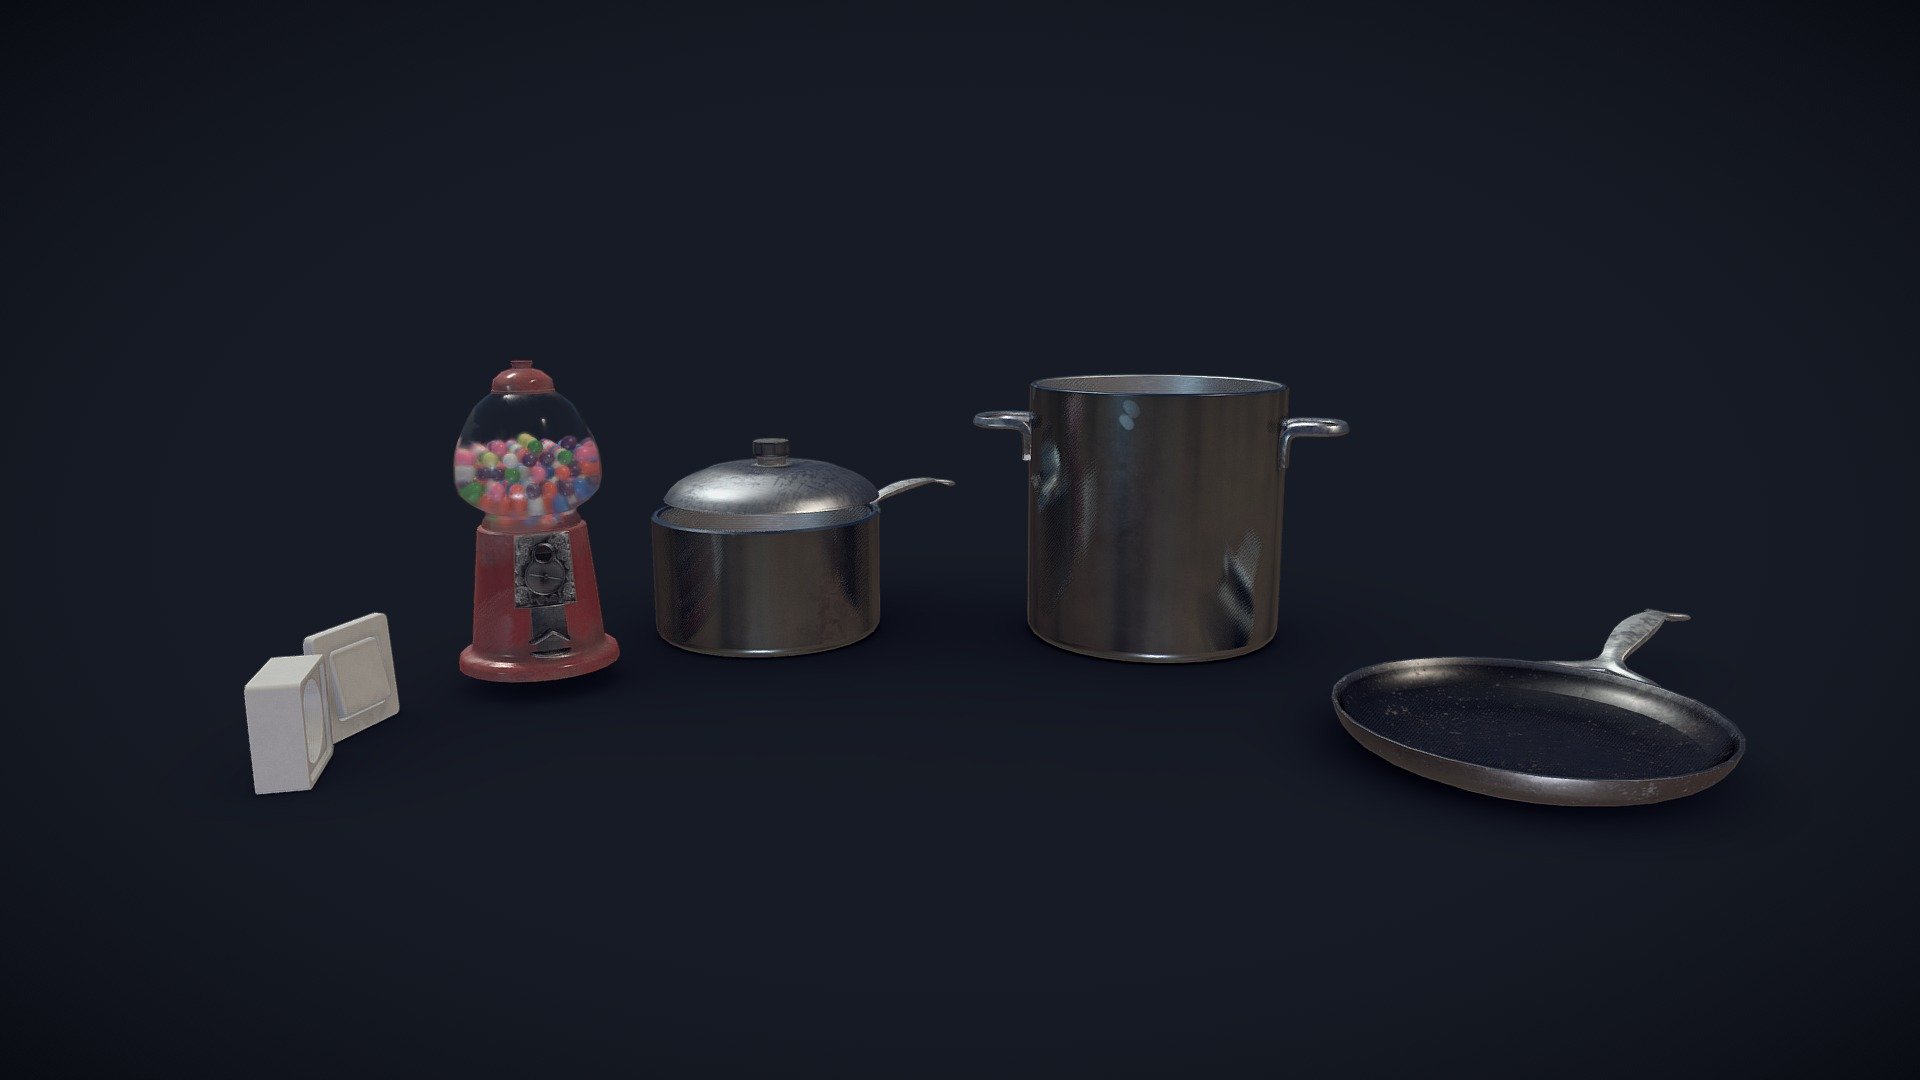 Other props for the diner